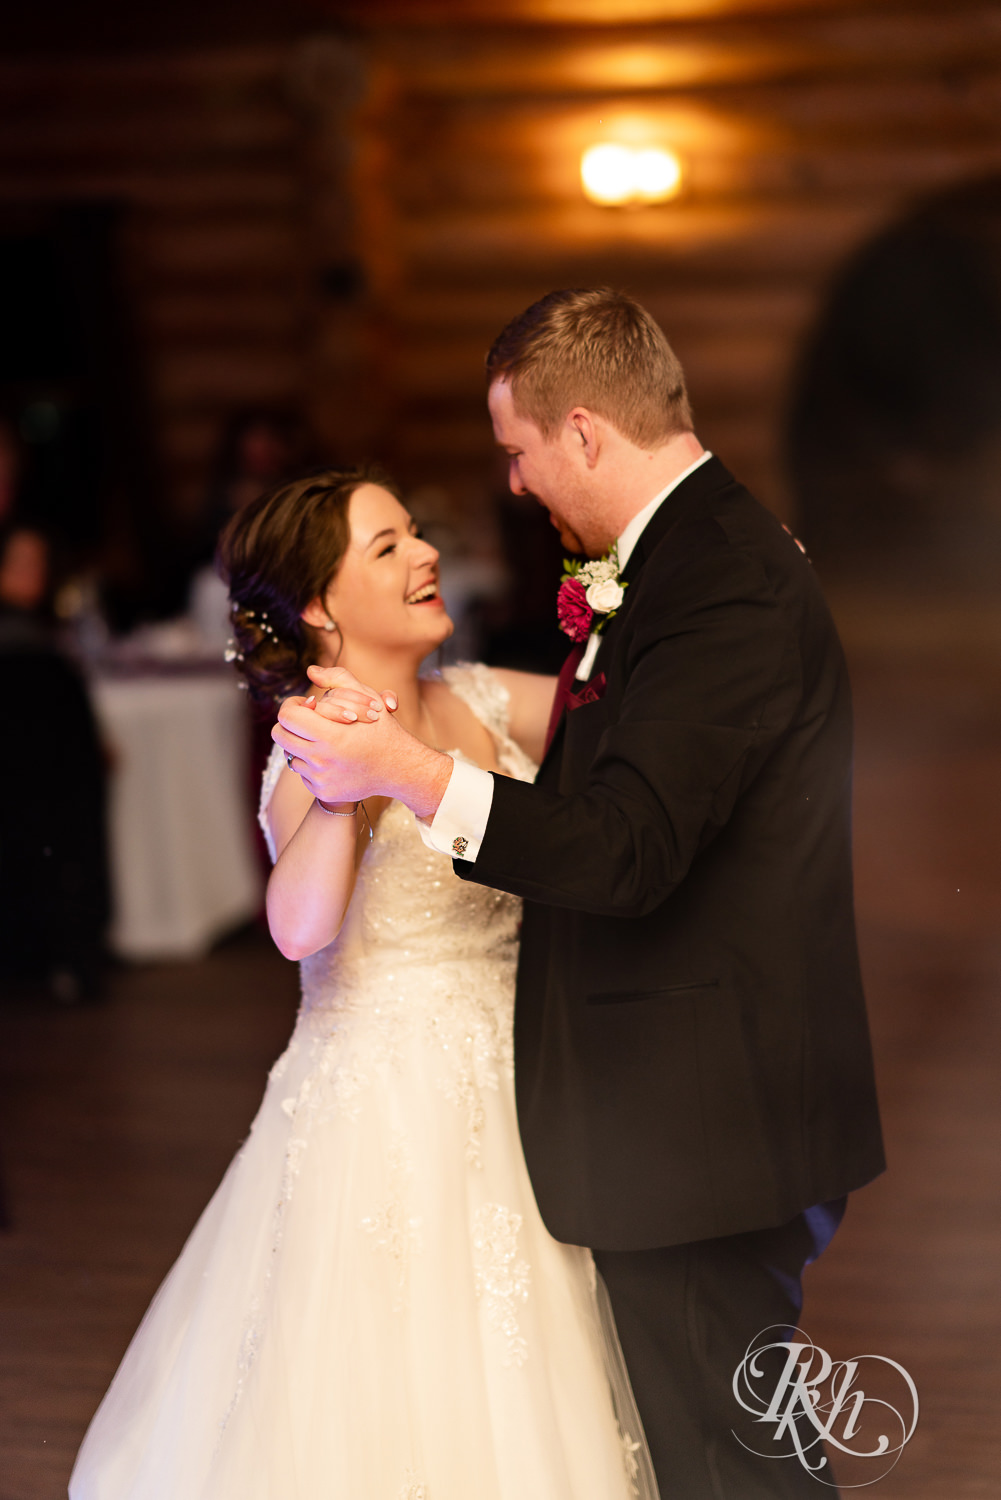 Bride and groom share first dance at wedding reception at Glenhaven Events in Farmington, Minnesota.